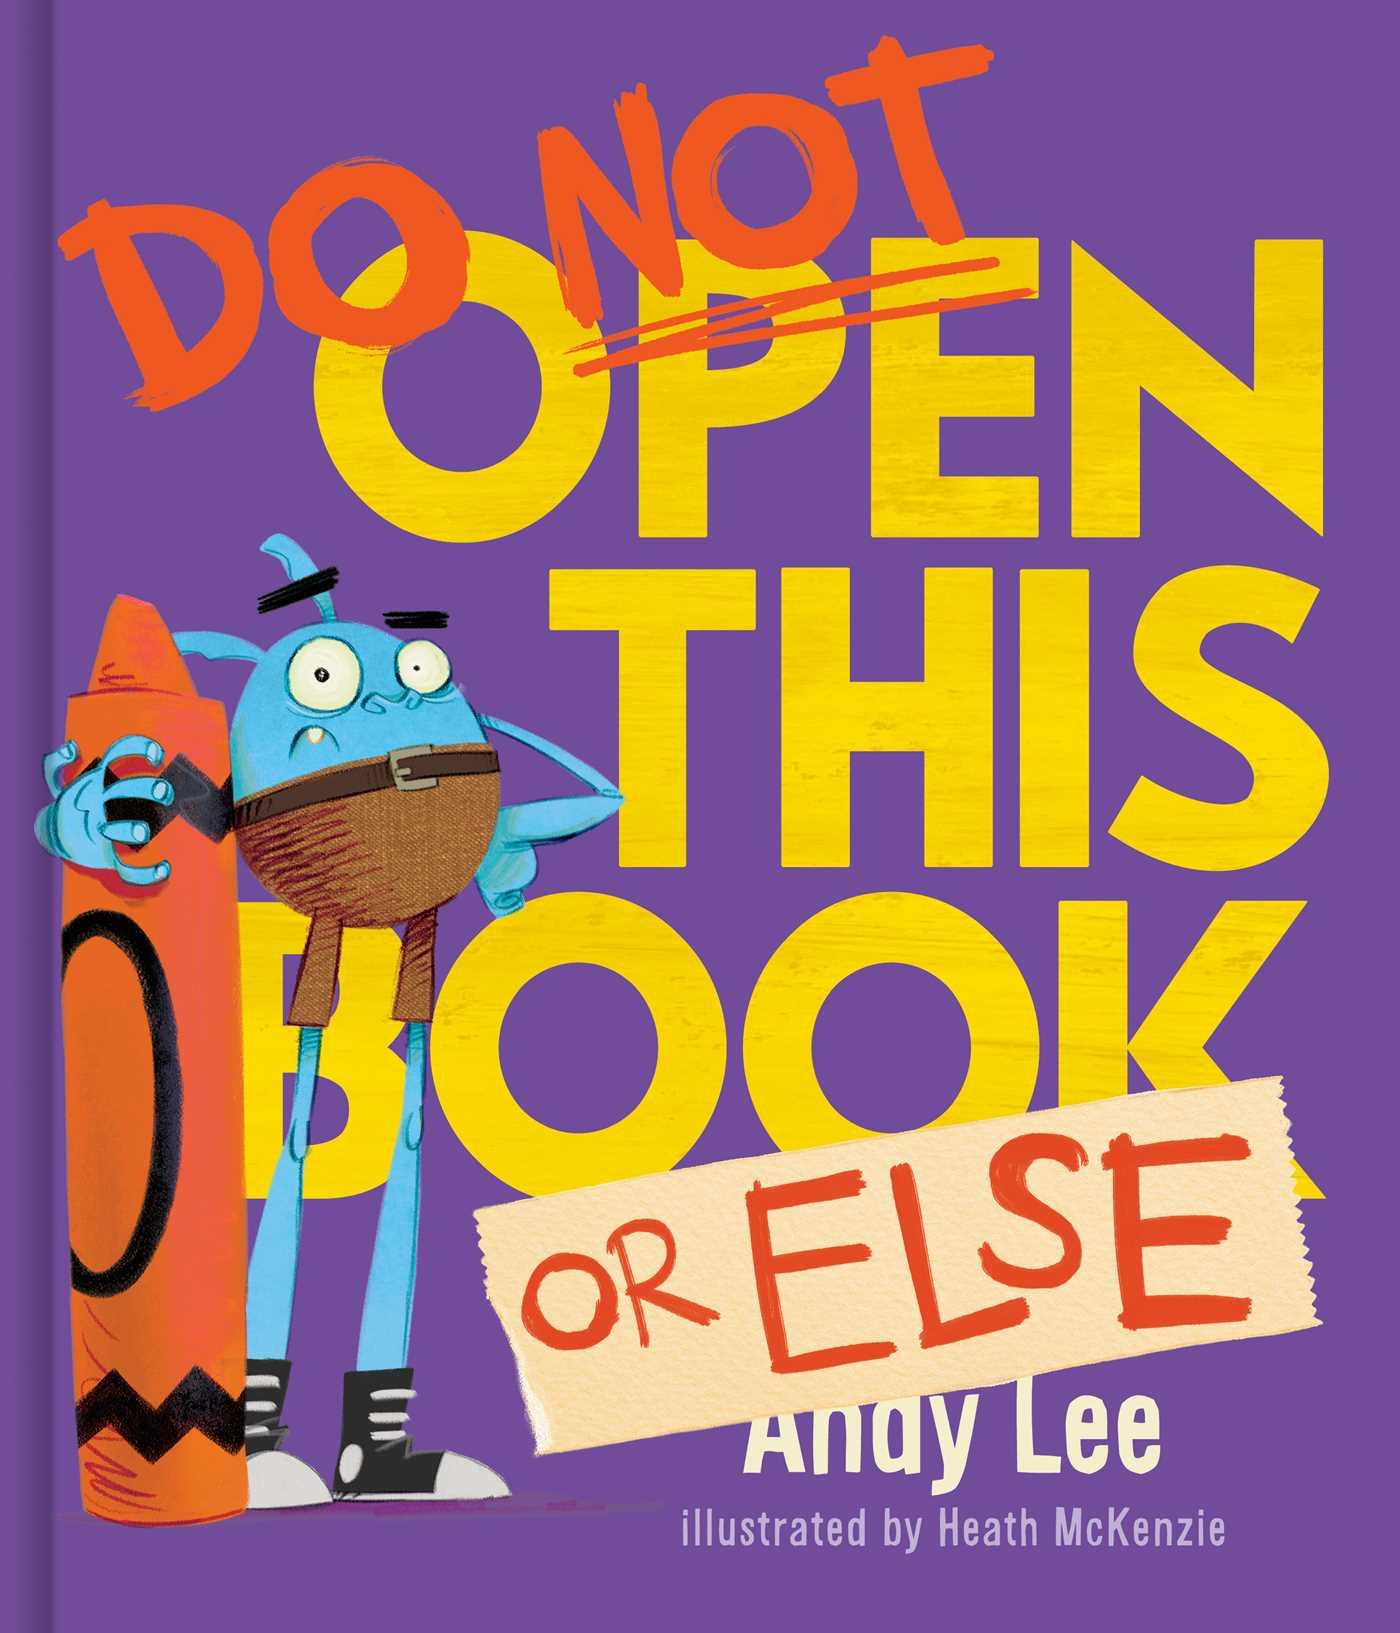 Book DO NOT OPEN THIS BK OR ELSE LEE ANDY